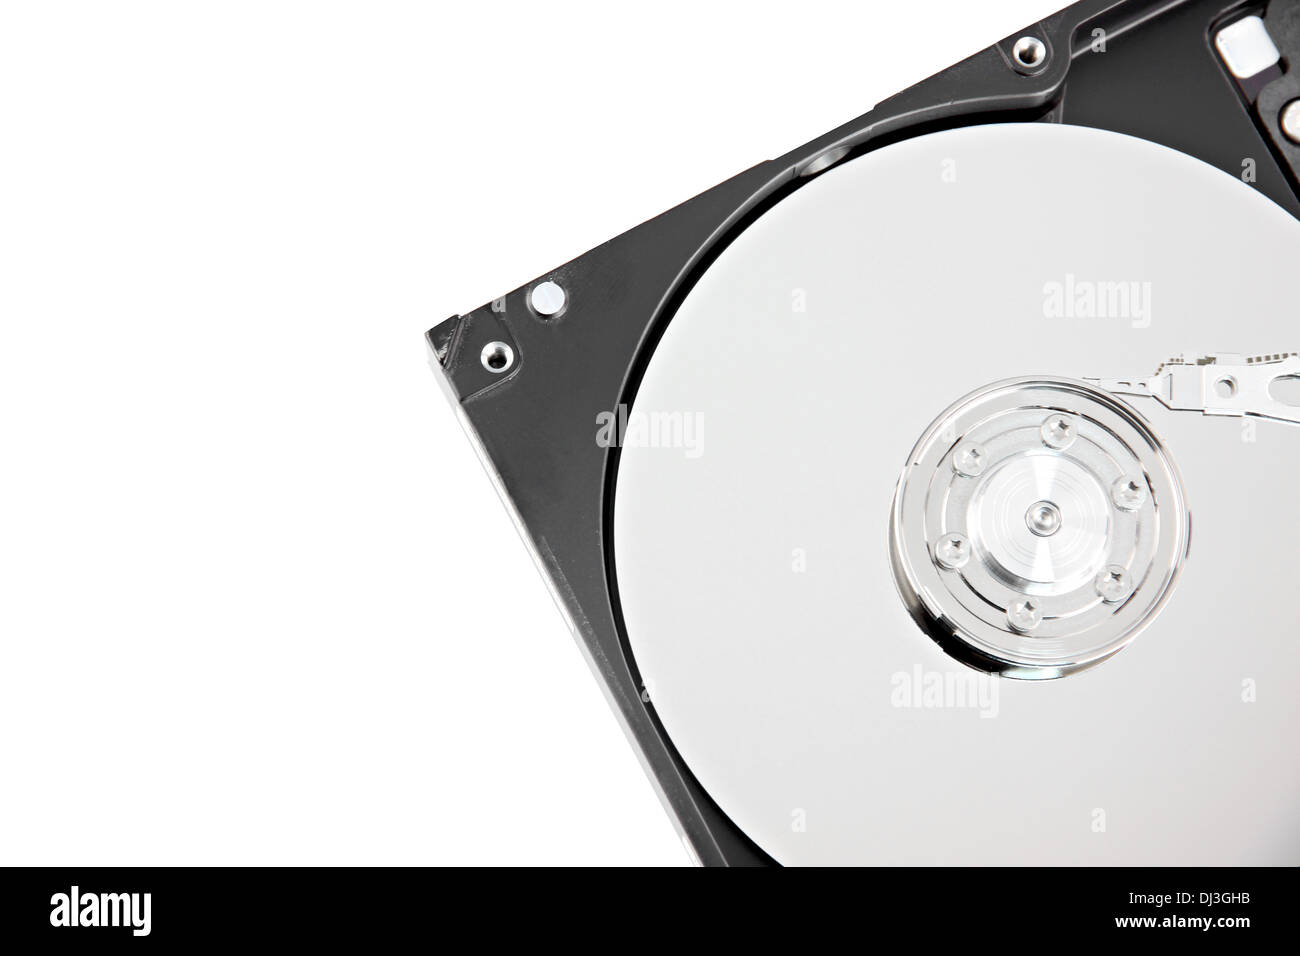 Open The Hard disk and focus picture in Disk storage on white background. Stock Photo